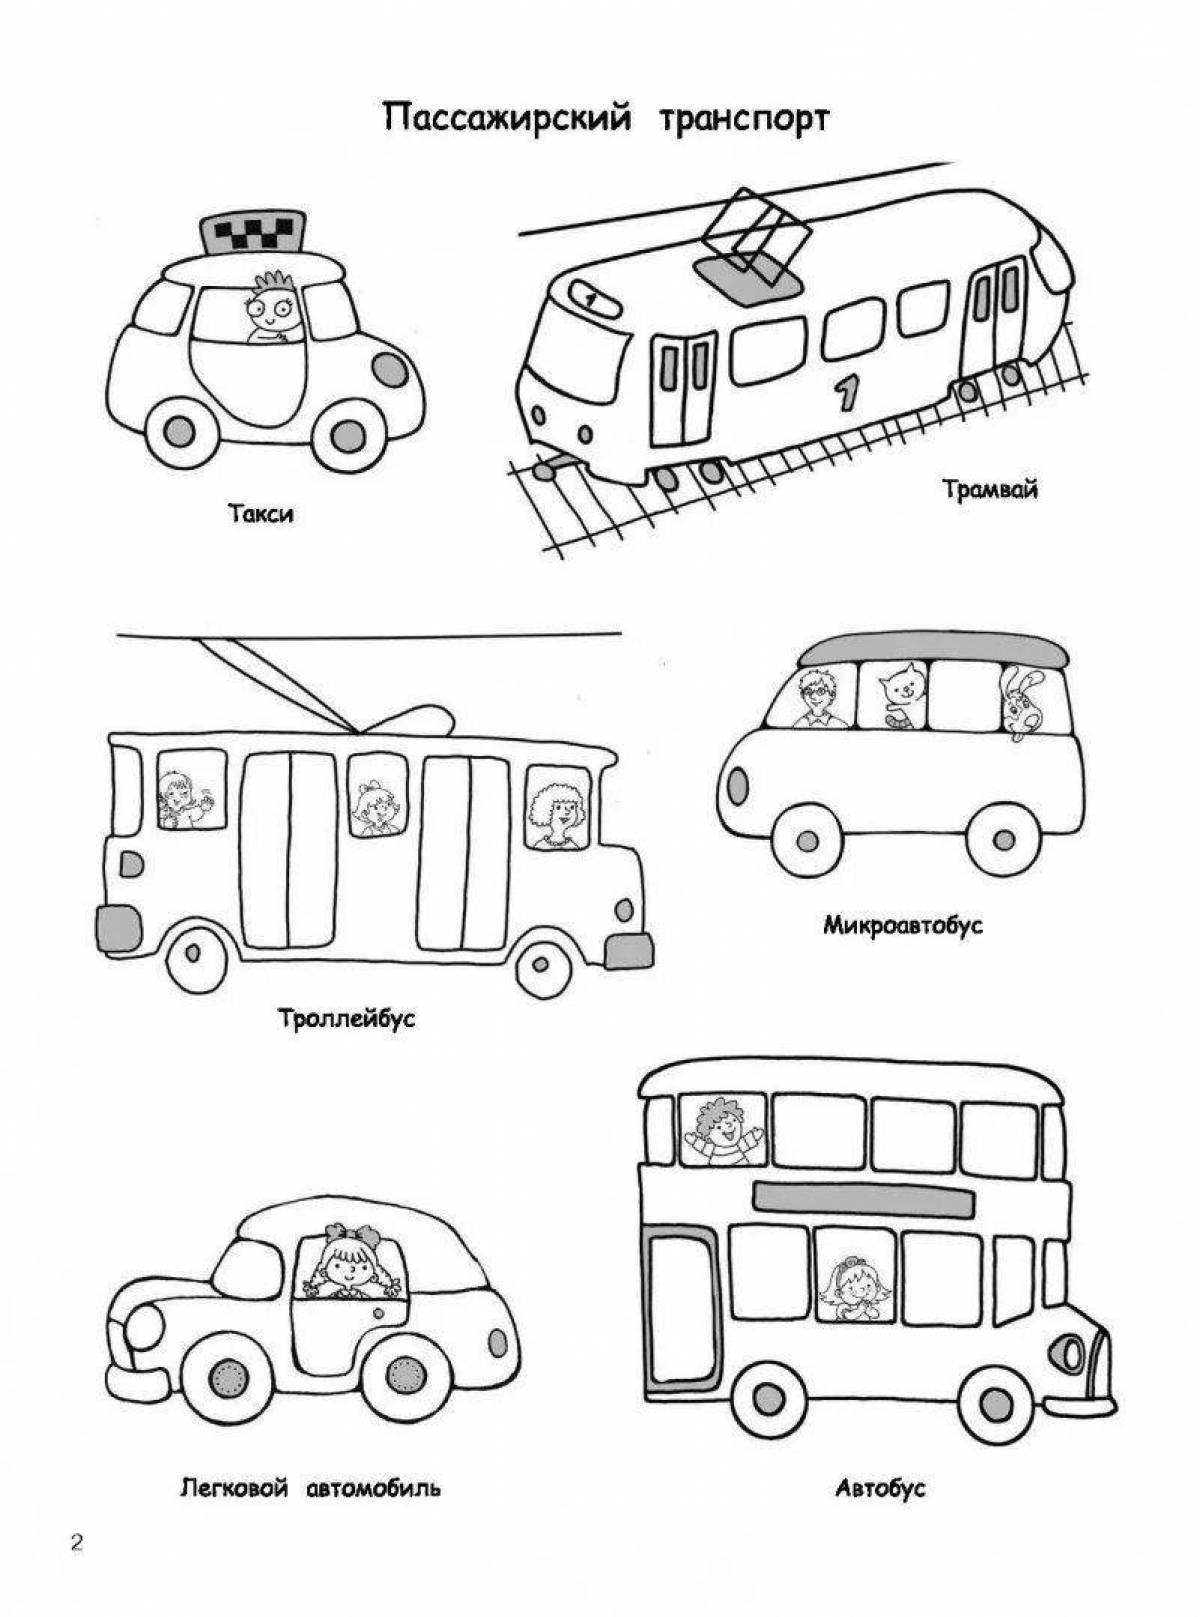 Fun coloring for land transport